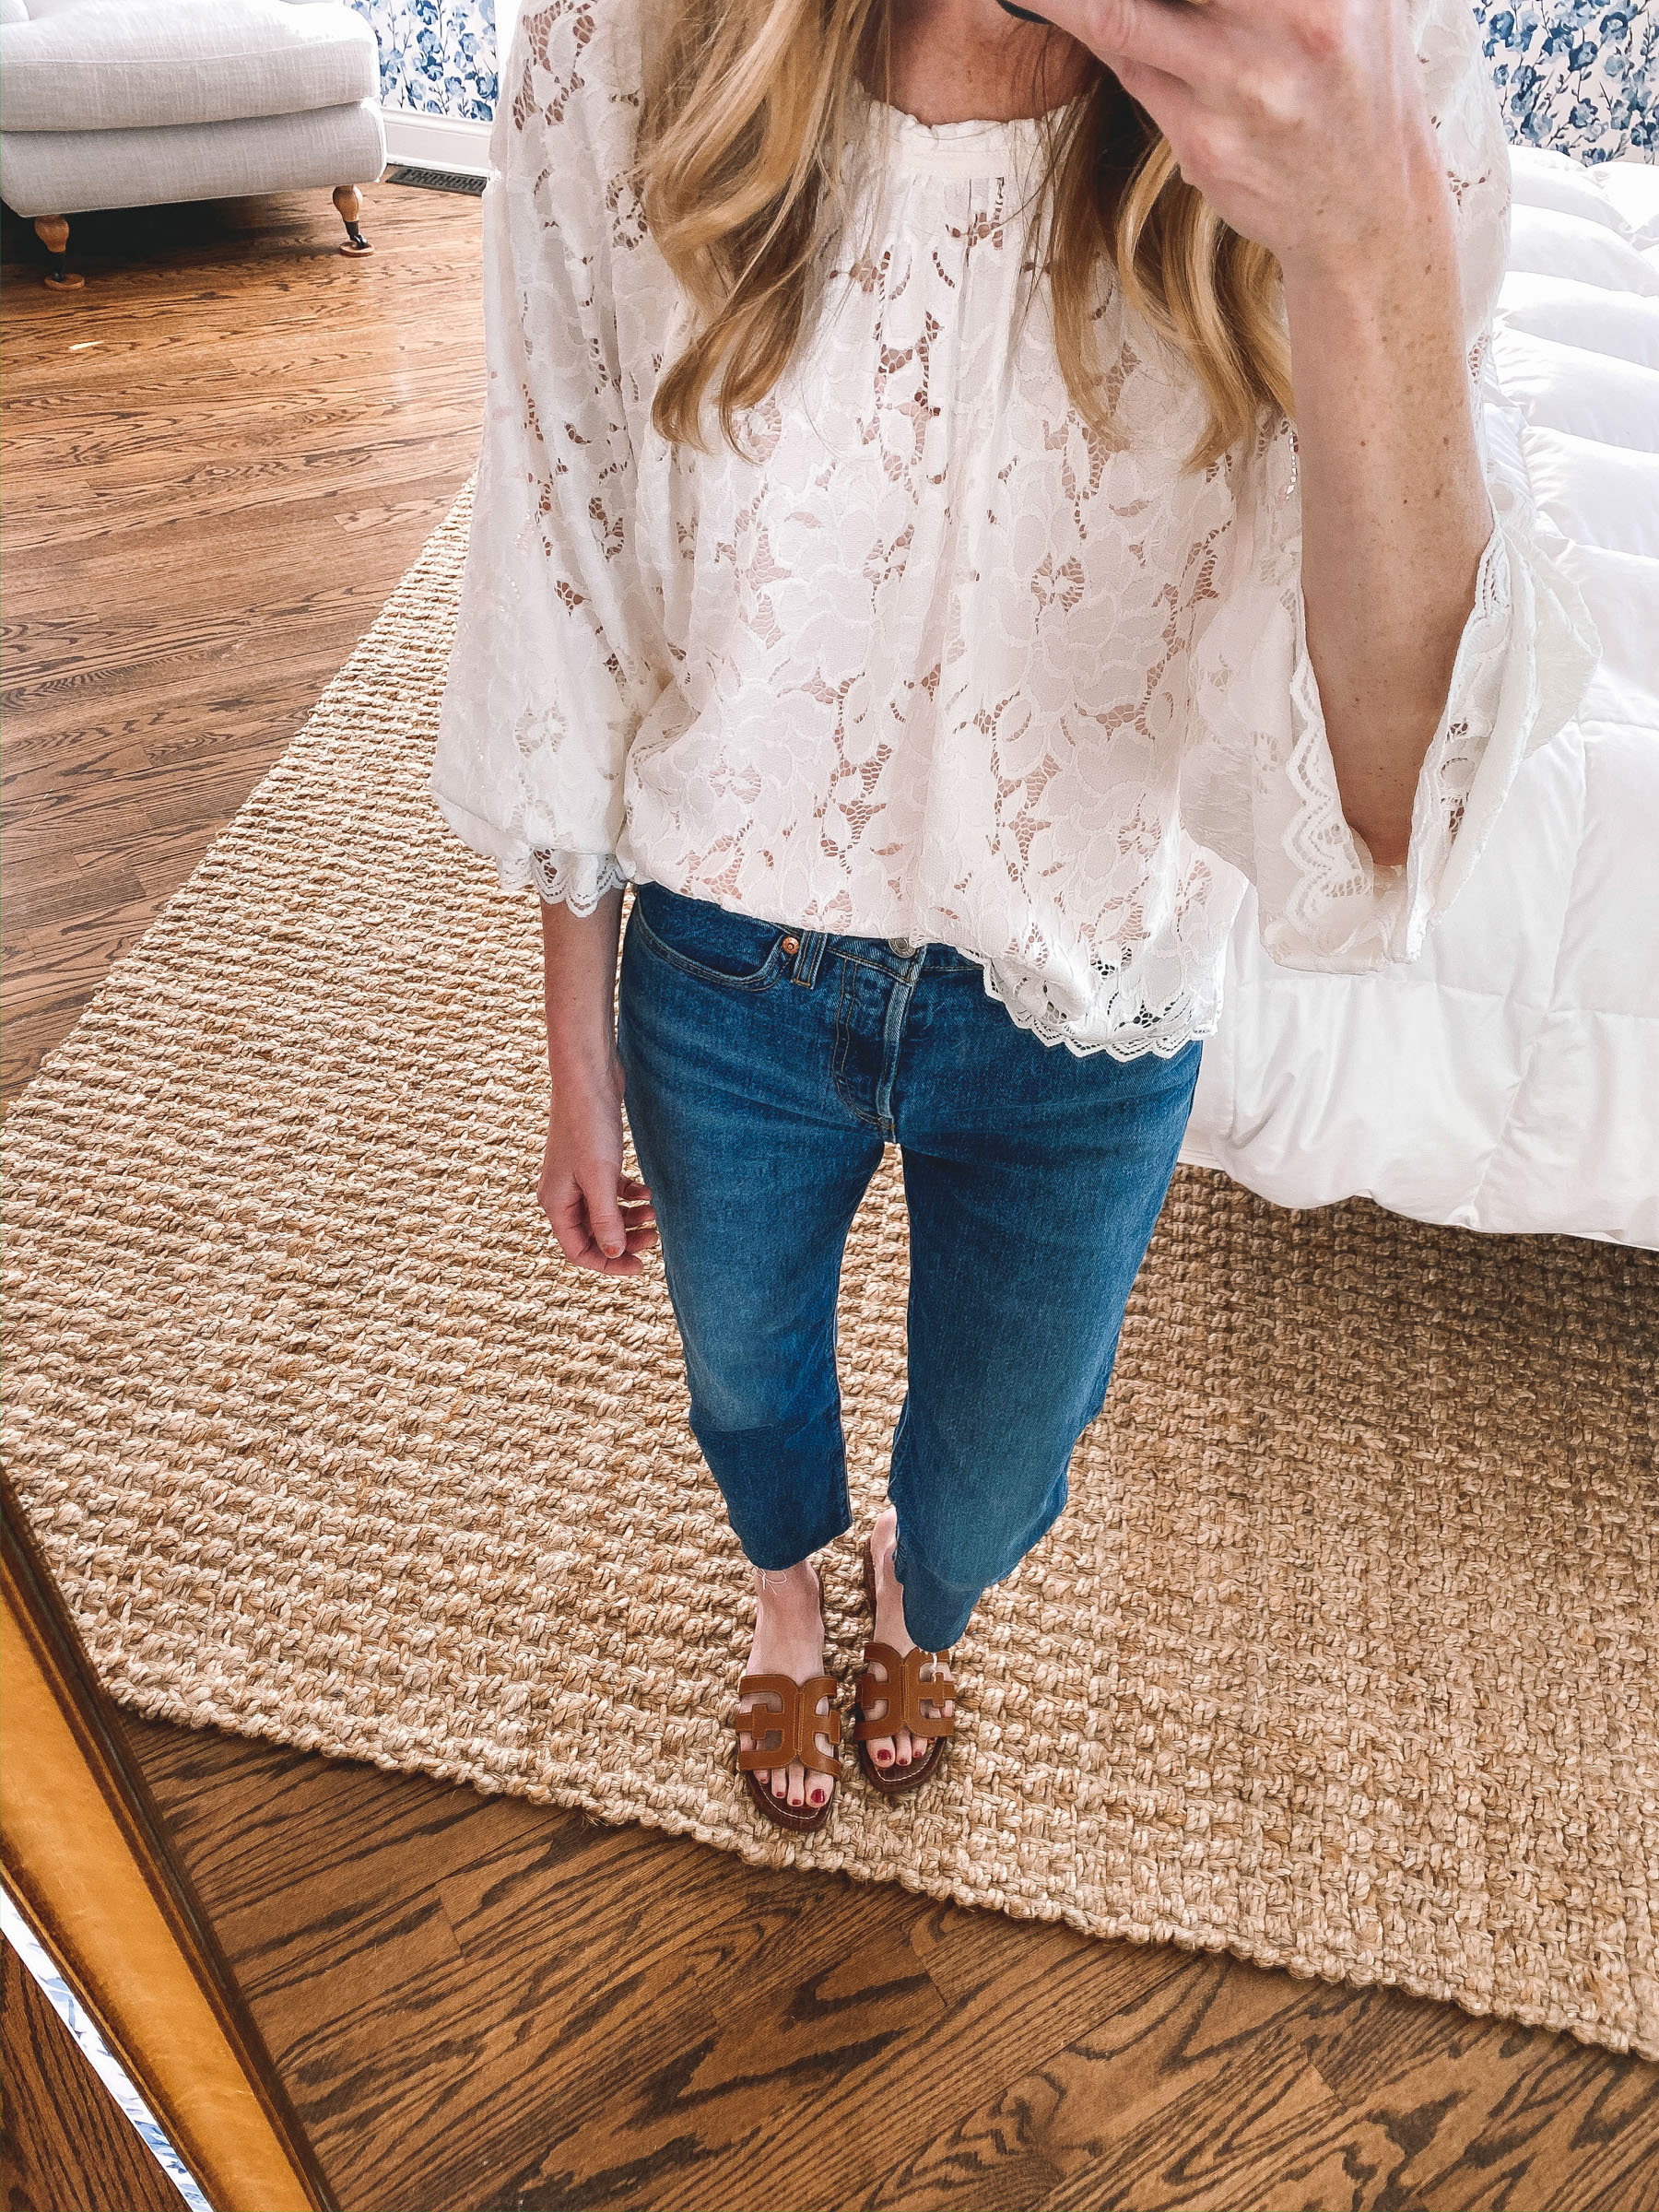 Free People Lace Top 